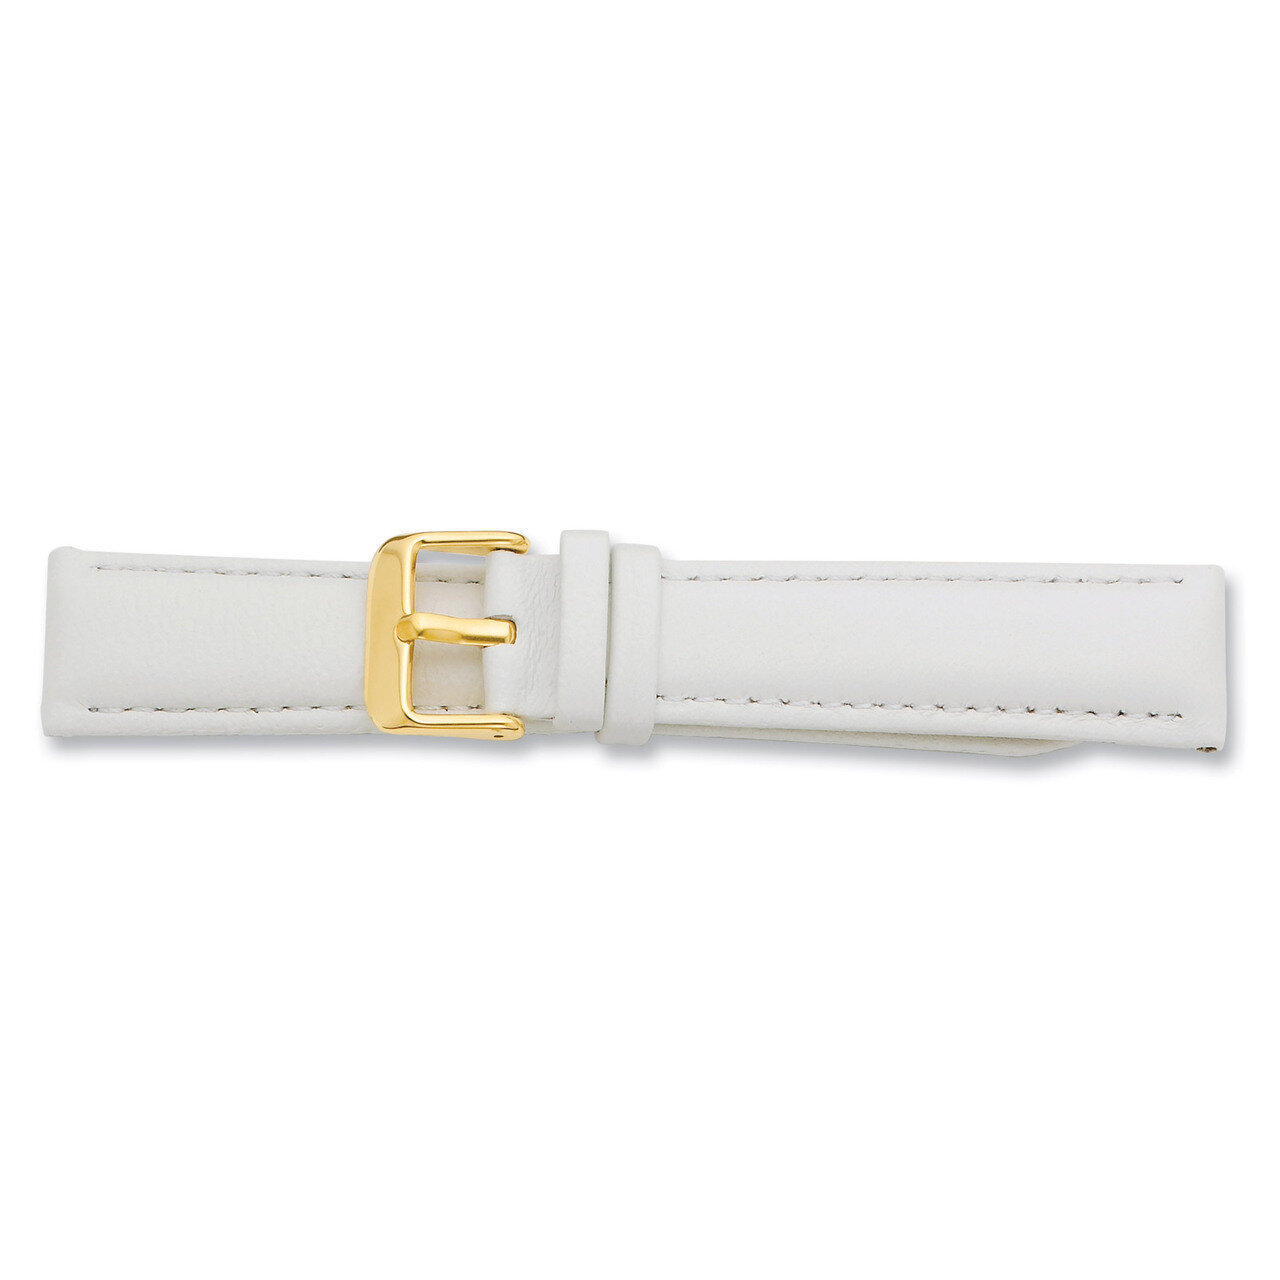 20mm White Glove Leather Buckle Watch Band 7.75 Inch Gold-tone BA197-20